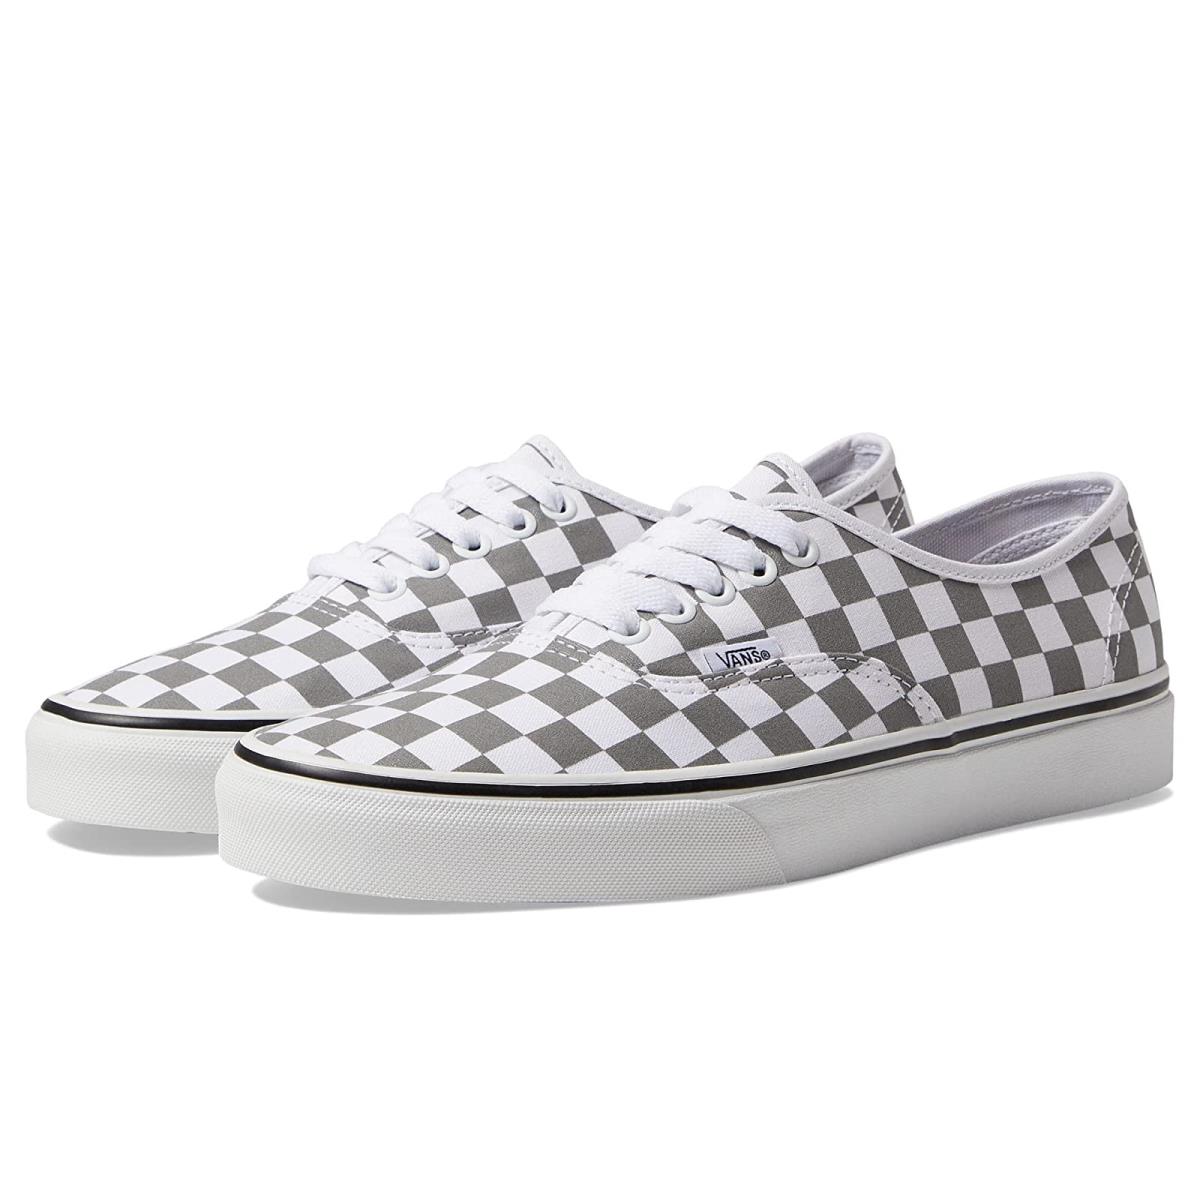 Unisex Sneakers Athletic Shoes Vans Cosmic Check Reflective